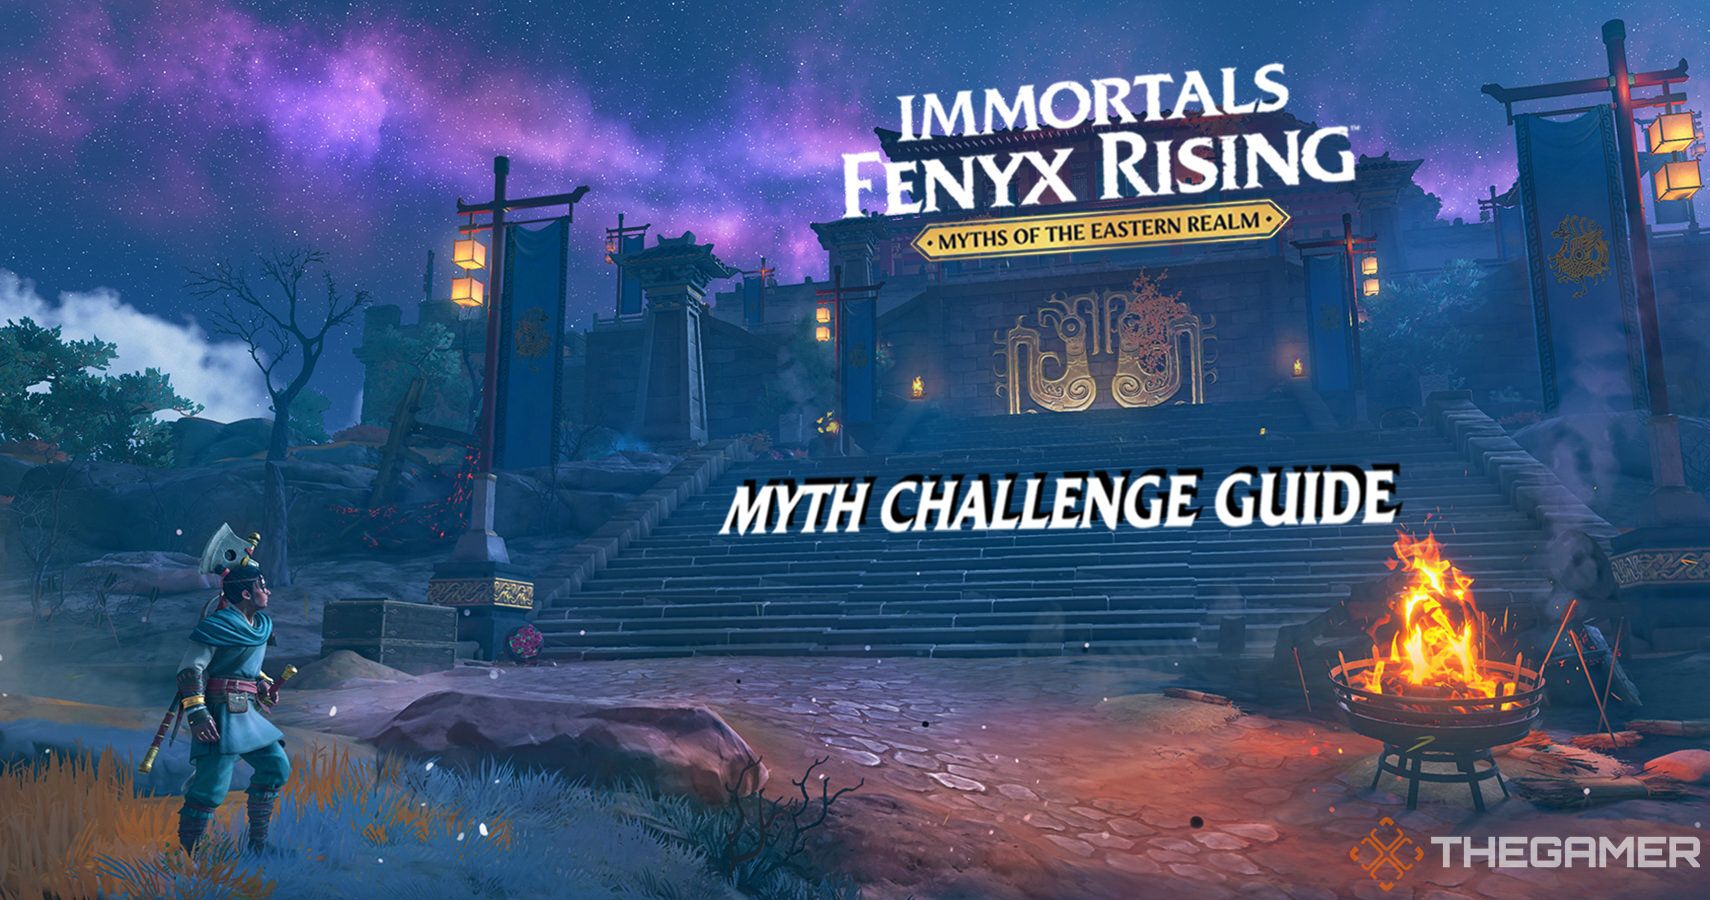 Immortals Fenyx Rising - Myths of the Eastern Realm - Myth Challenge Guide